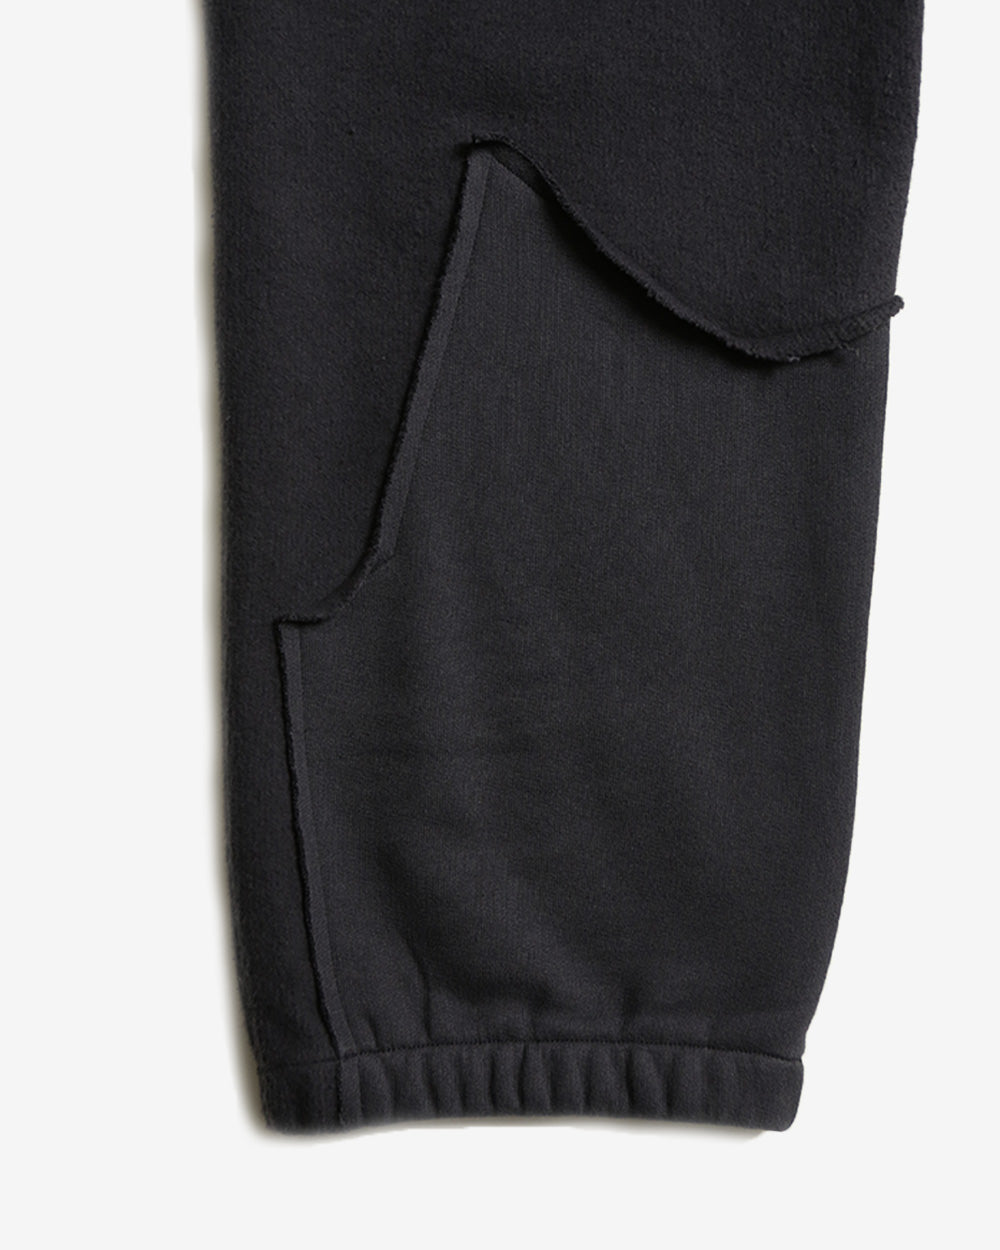 THOUGHT BUBBLE PANELLED JOGGER ANTHRACITE